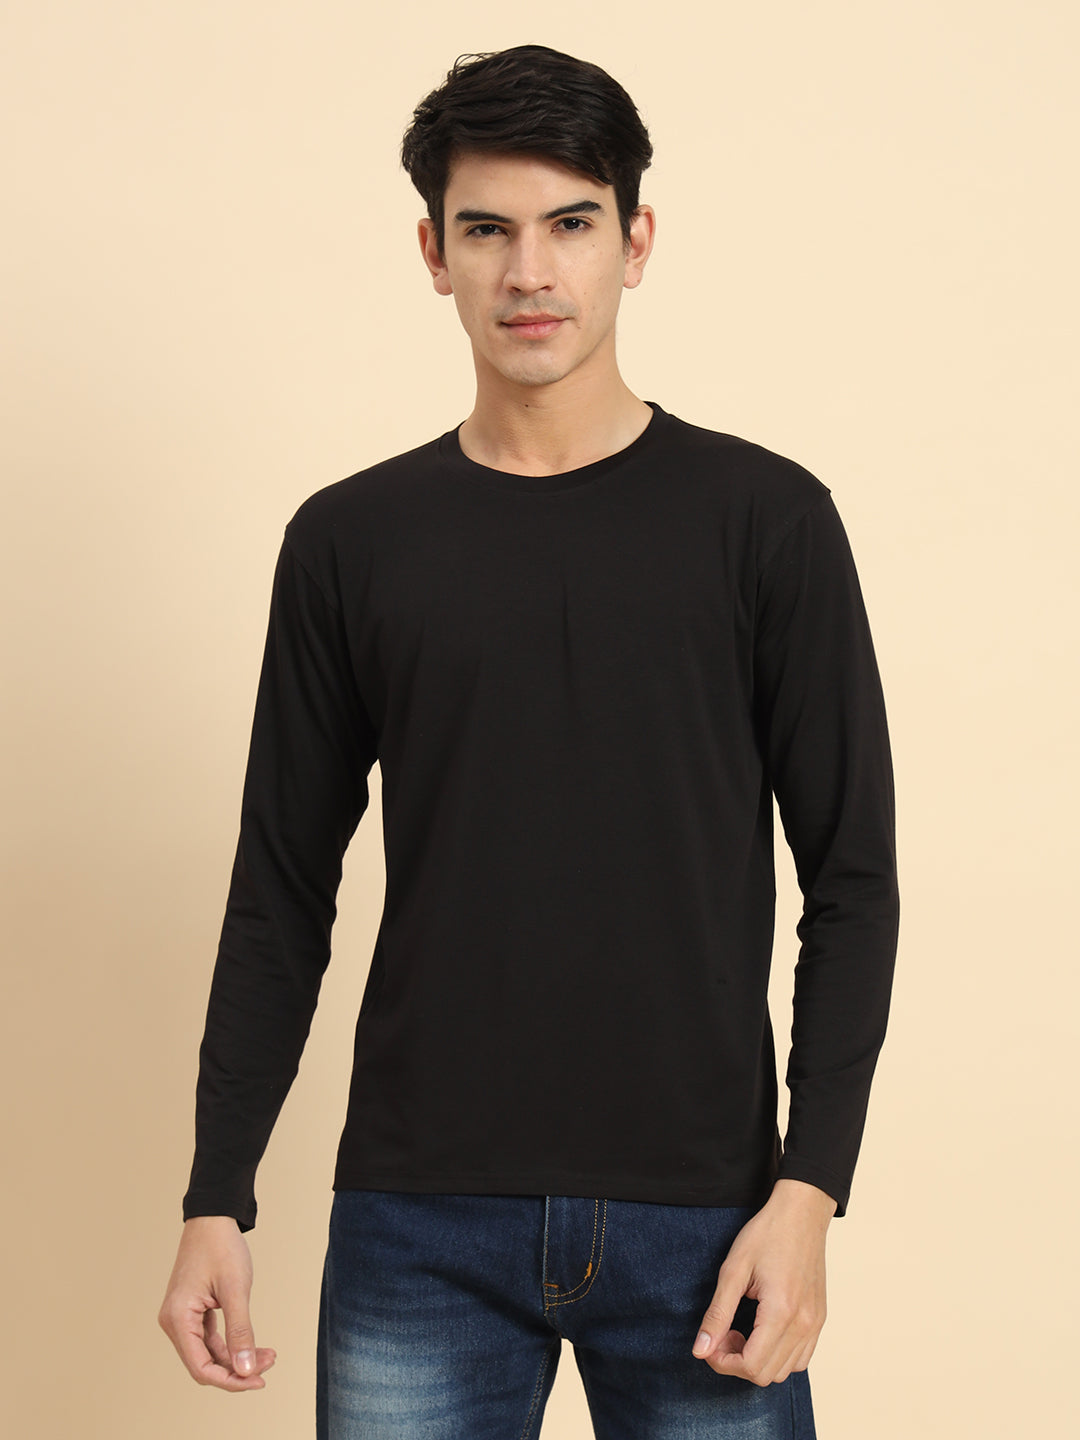 Carbon Solid Full Sleeve T-Shirt